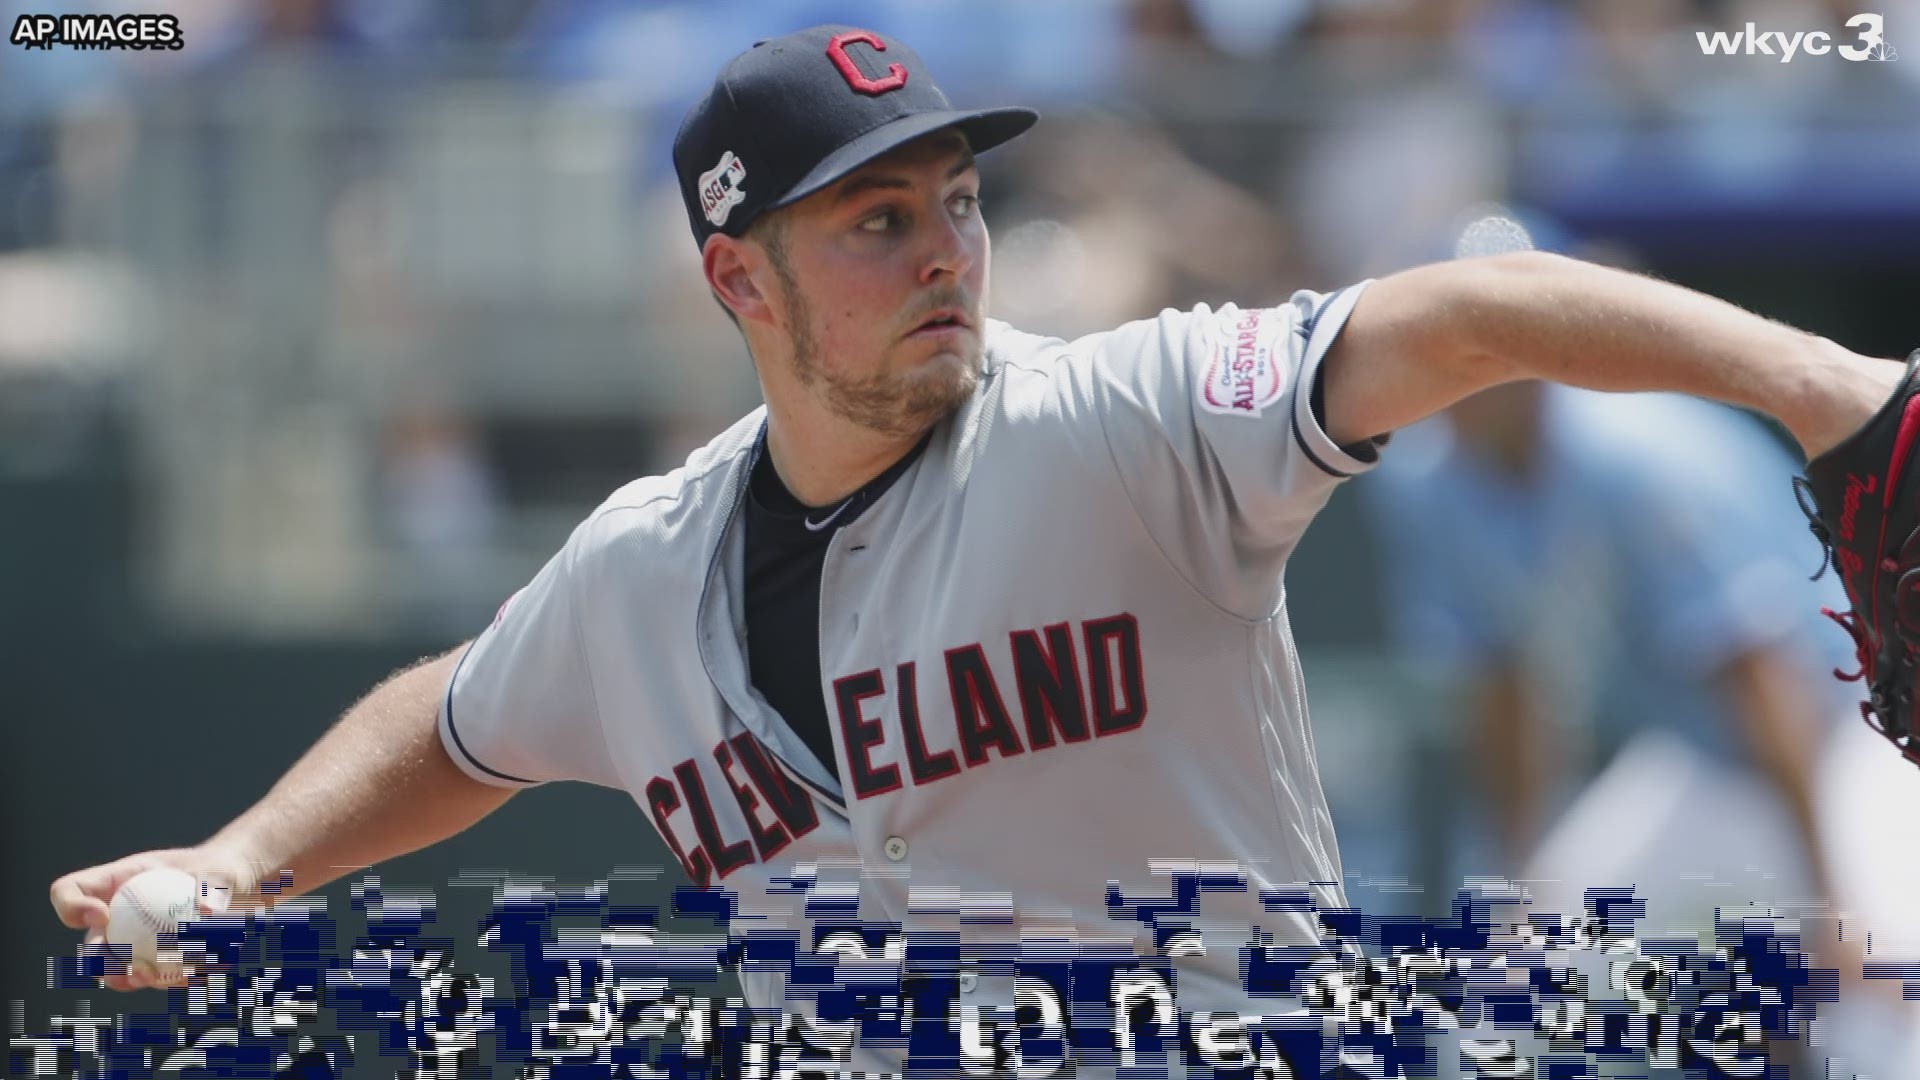 According to Jon Heyman of the MLB Network, Cleveland Indians starting pitcher Trevor Bauer will be fined for throwing a ball into the stands on Sunday.